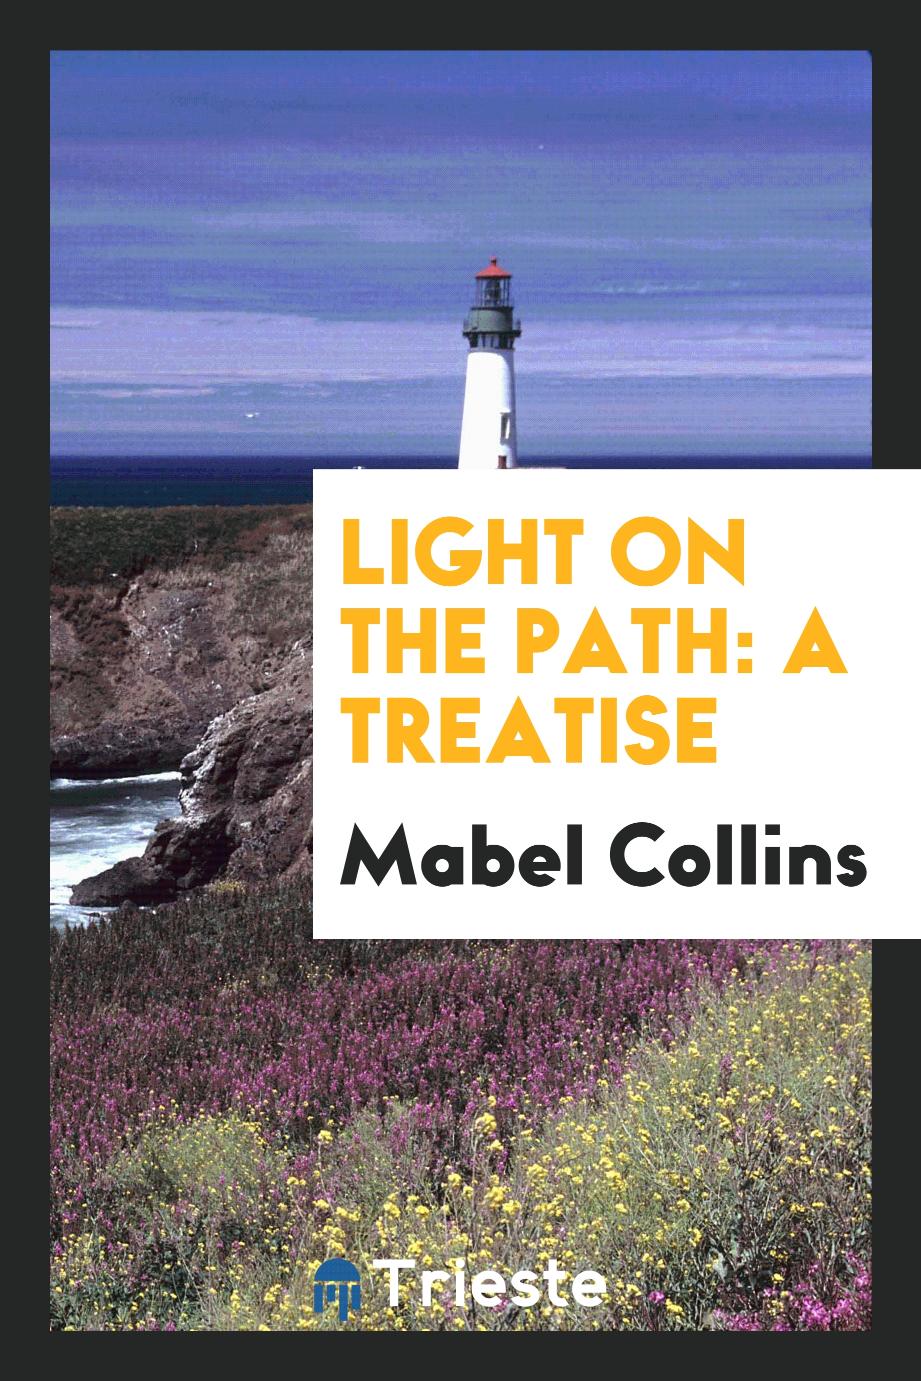 Mabel Collins - Light on the Path: A Treatise